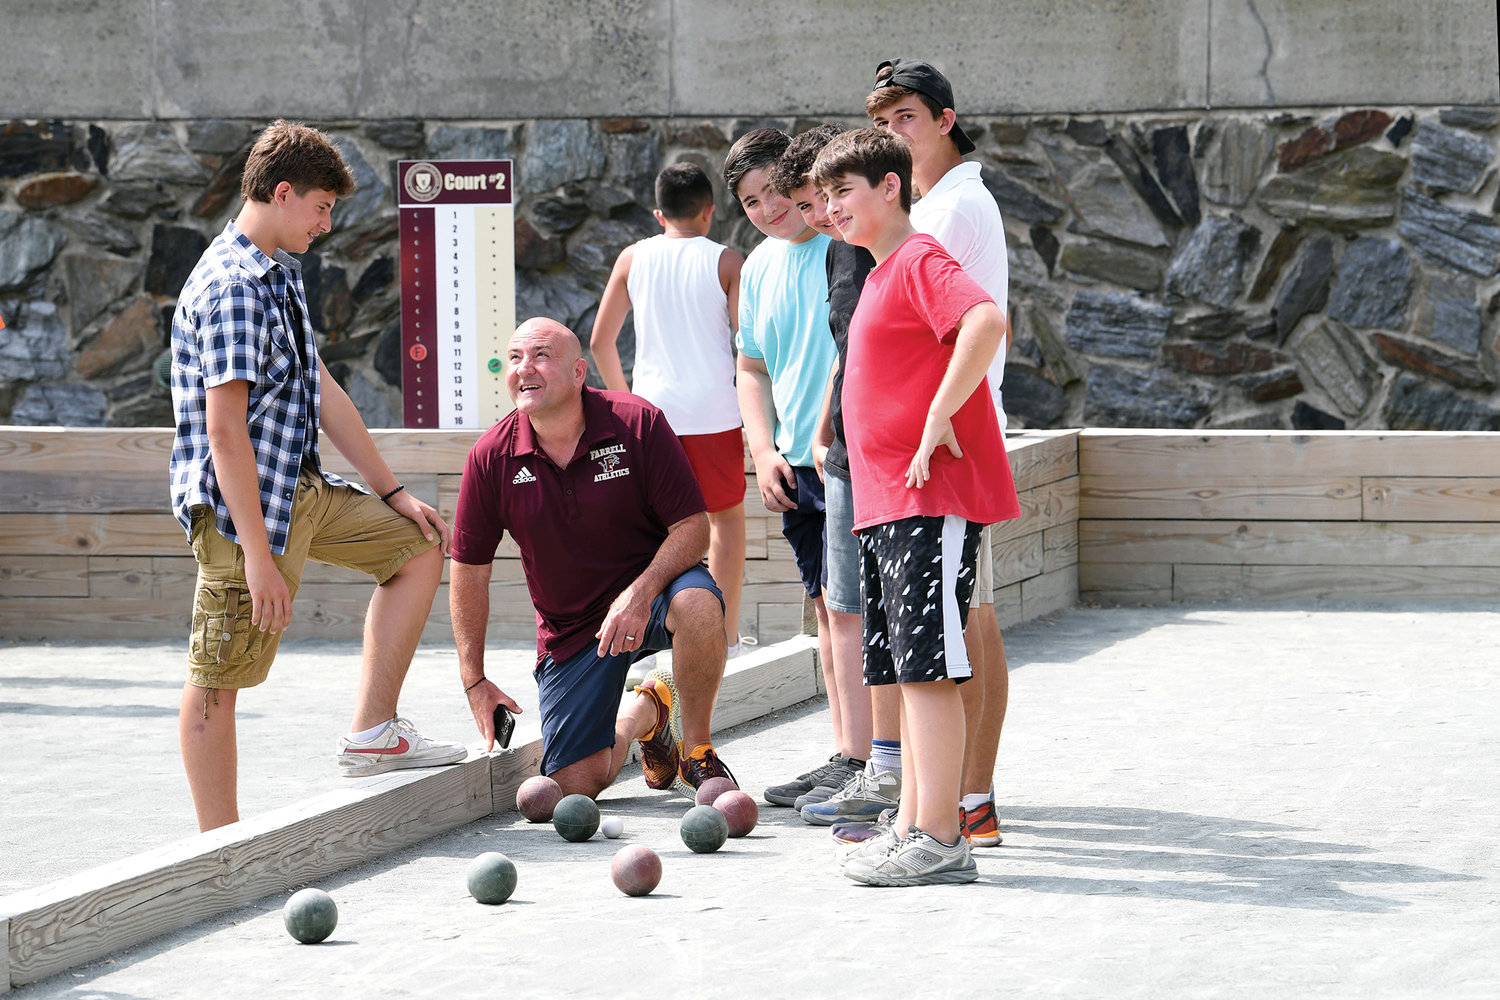 Lou Tobacco, president of Msgr. Farrell High School and camp director, checks the bocce balls during a match.